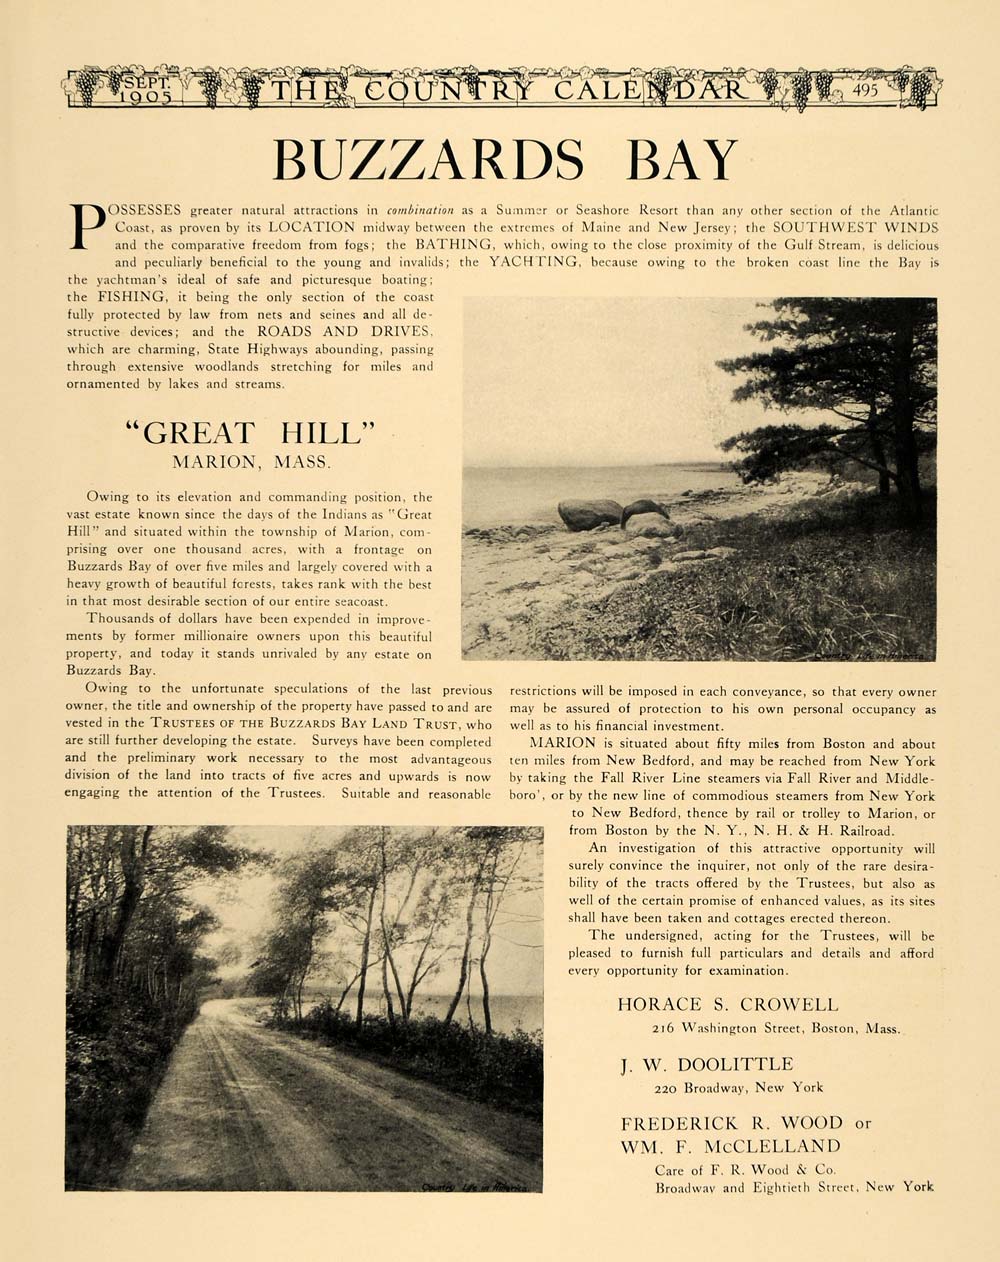 1905 Ad Buzzards Bay Marion Mass Horace S. Crowell Wood - ORIGINAL CC1